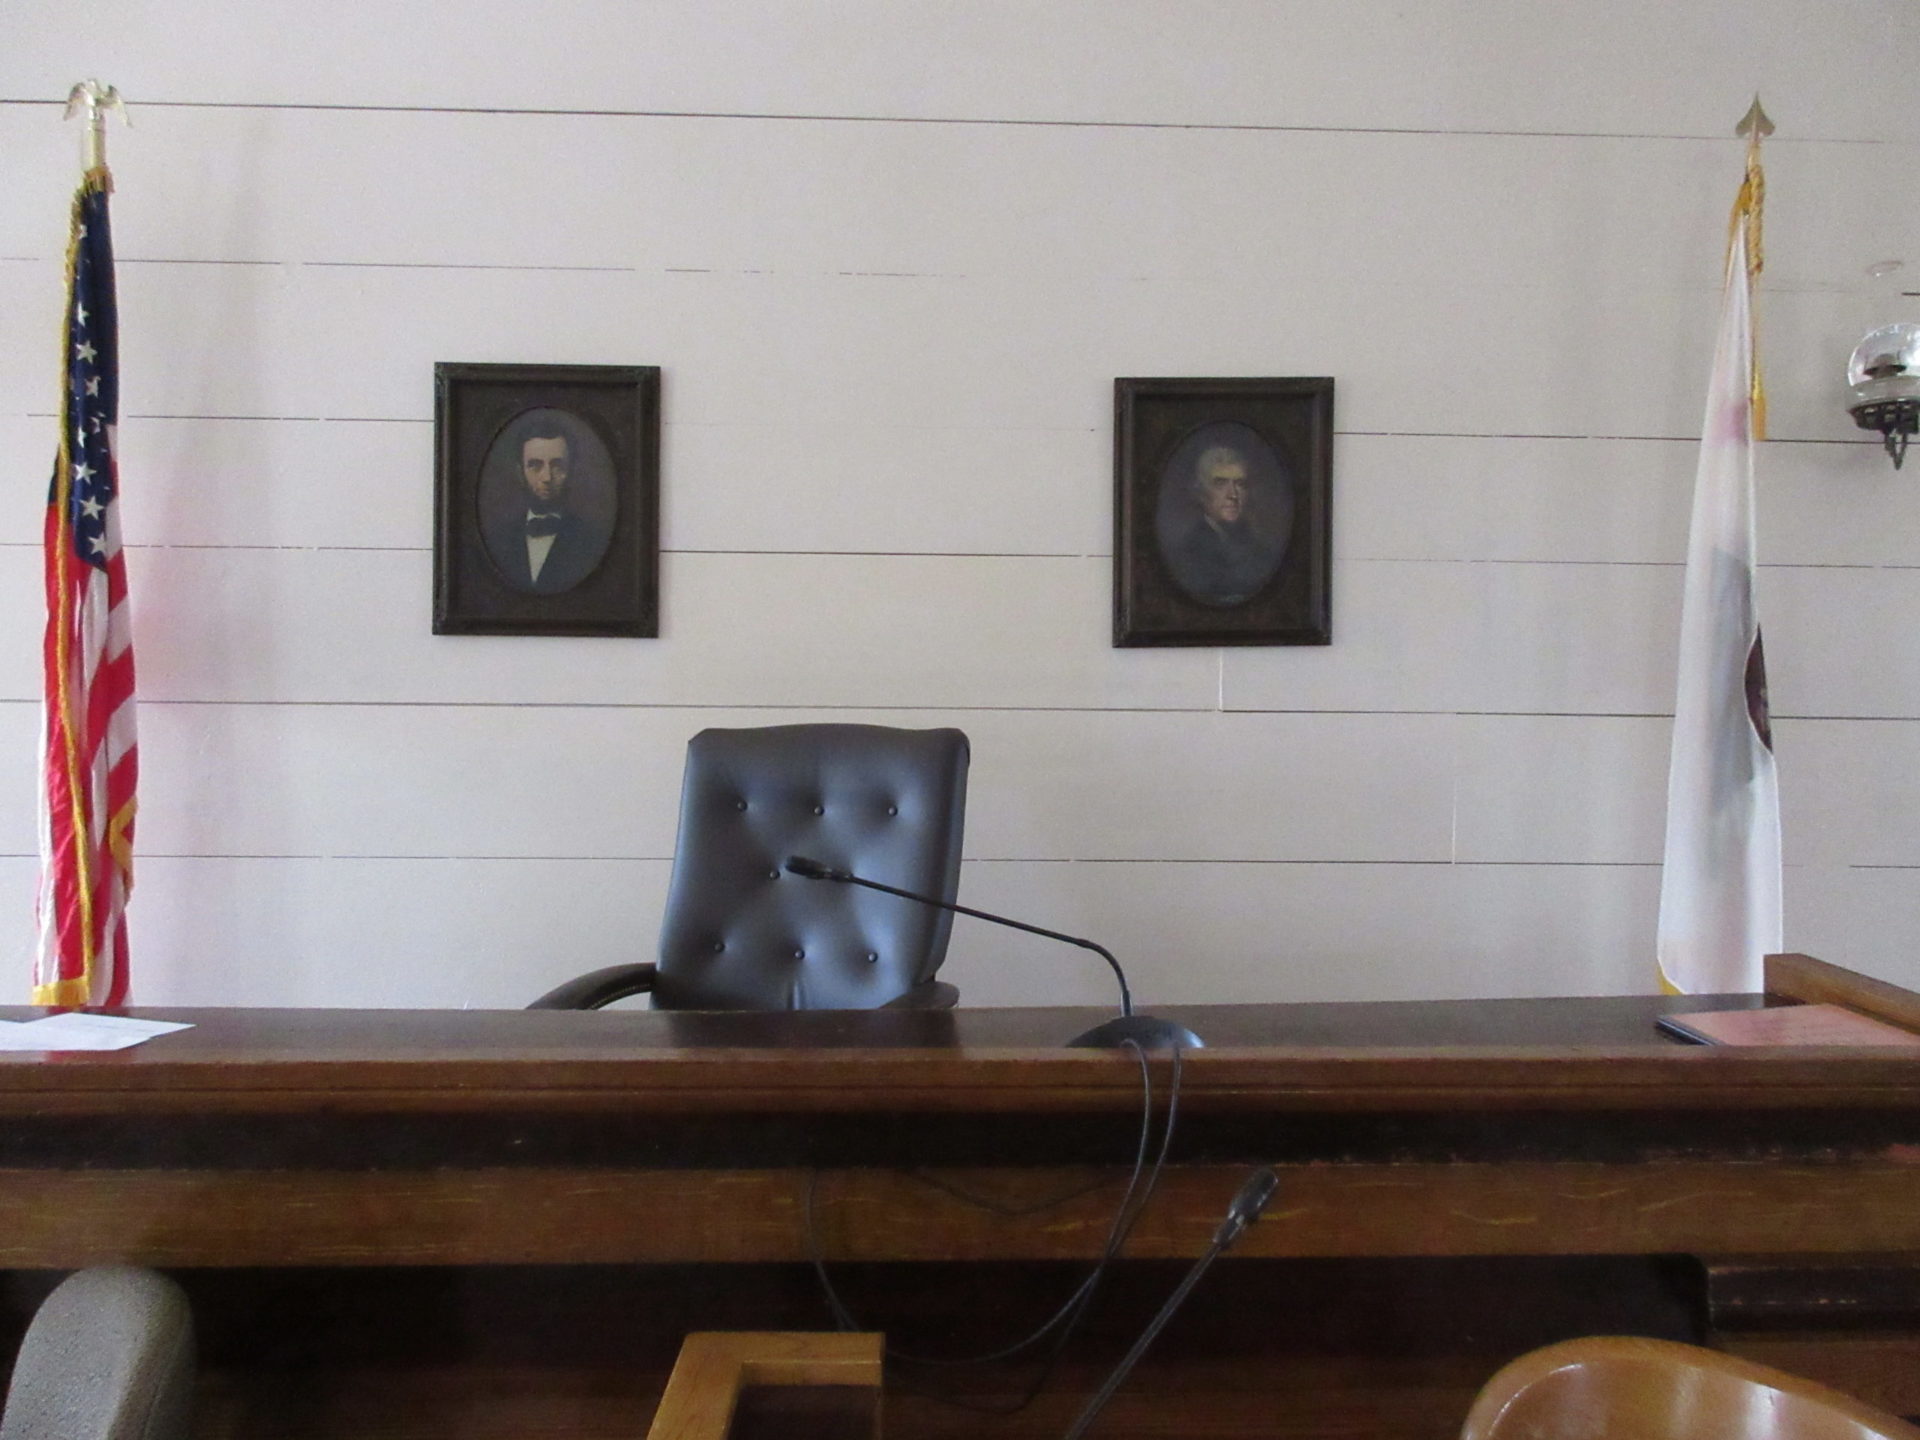 Image from the Gallery: Mariposa Courthouse – Mariposa, CA